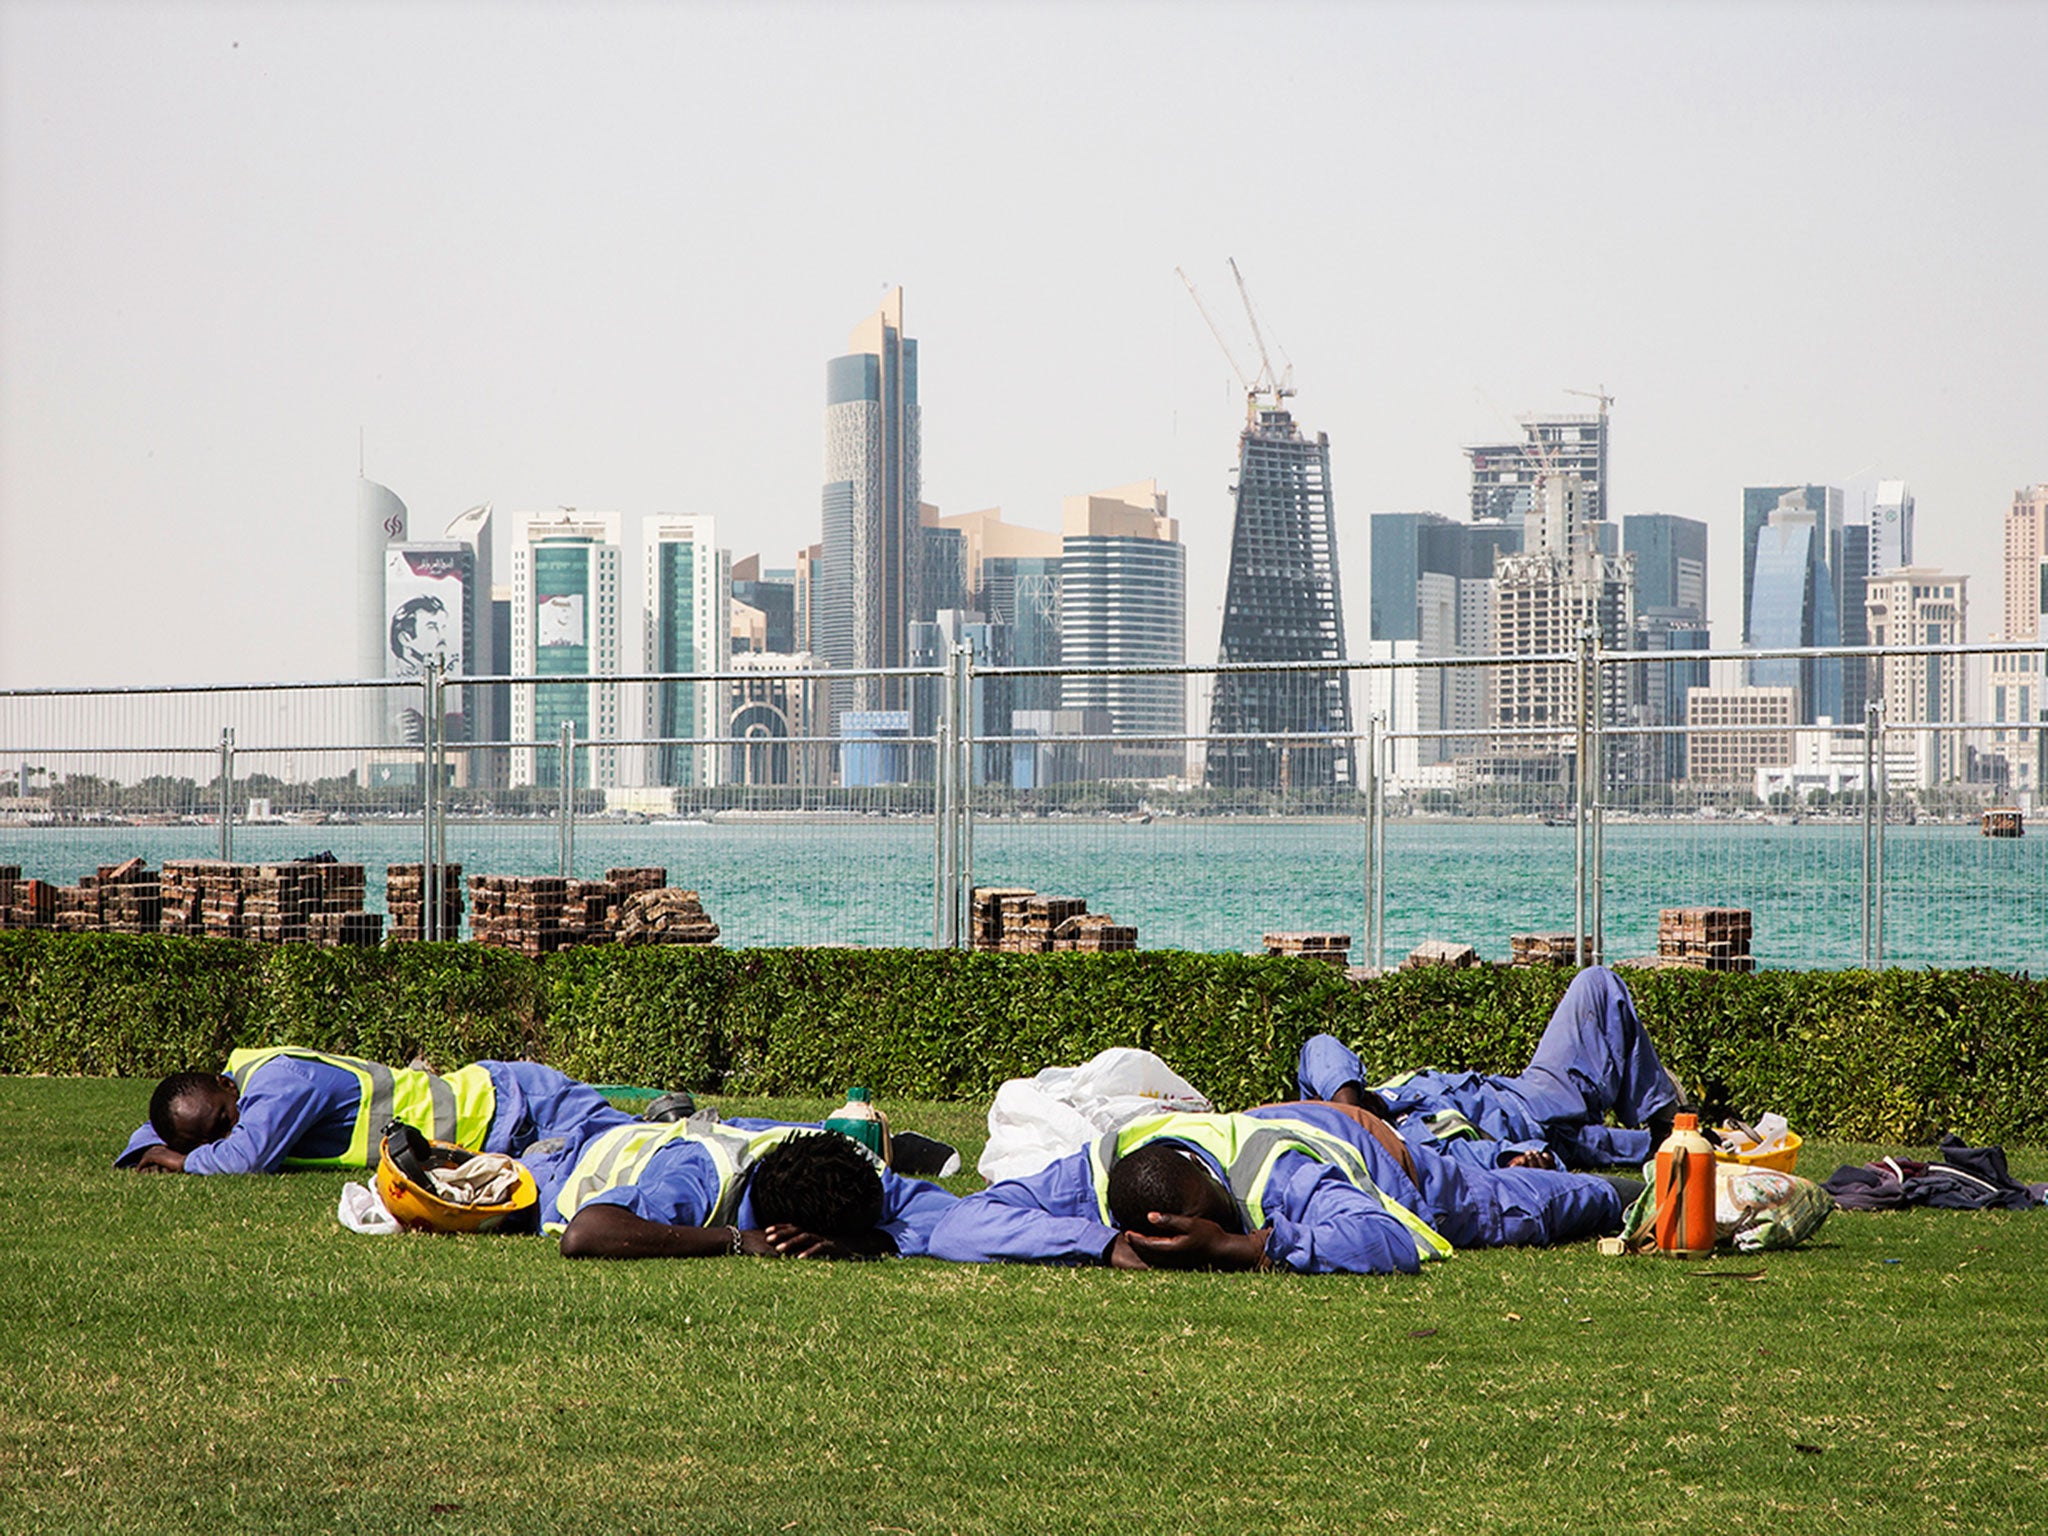 Workers sleep in the sun as construction continues in Doha